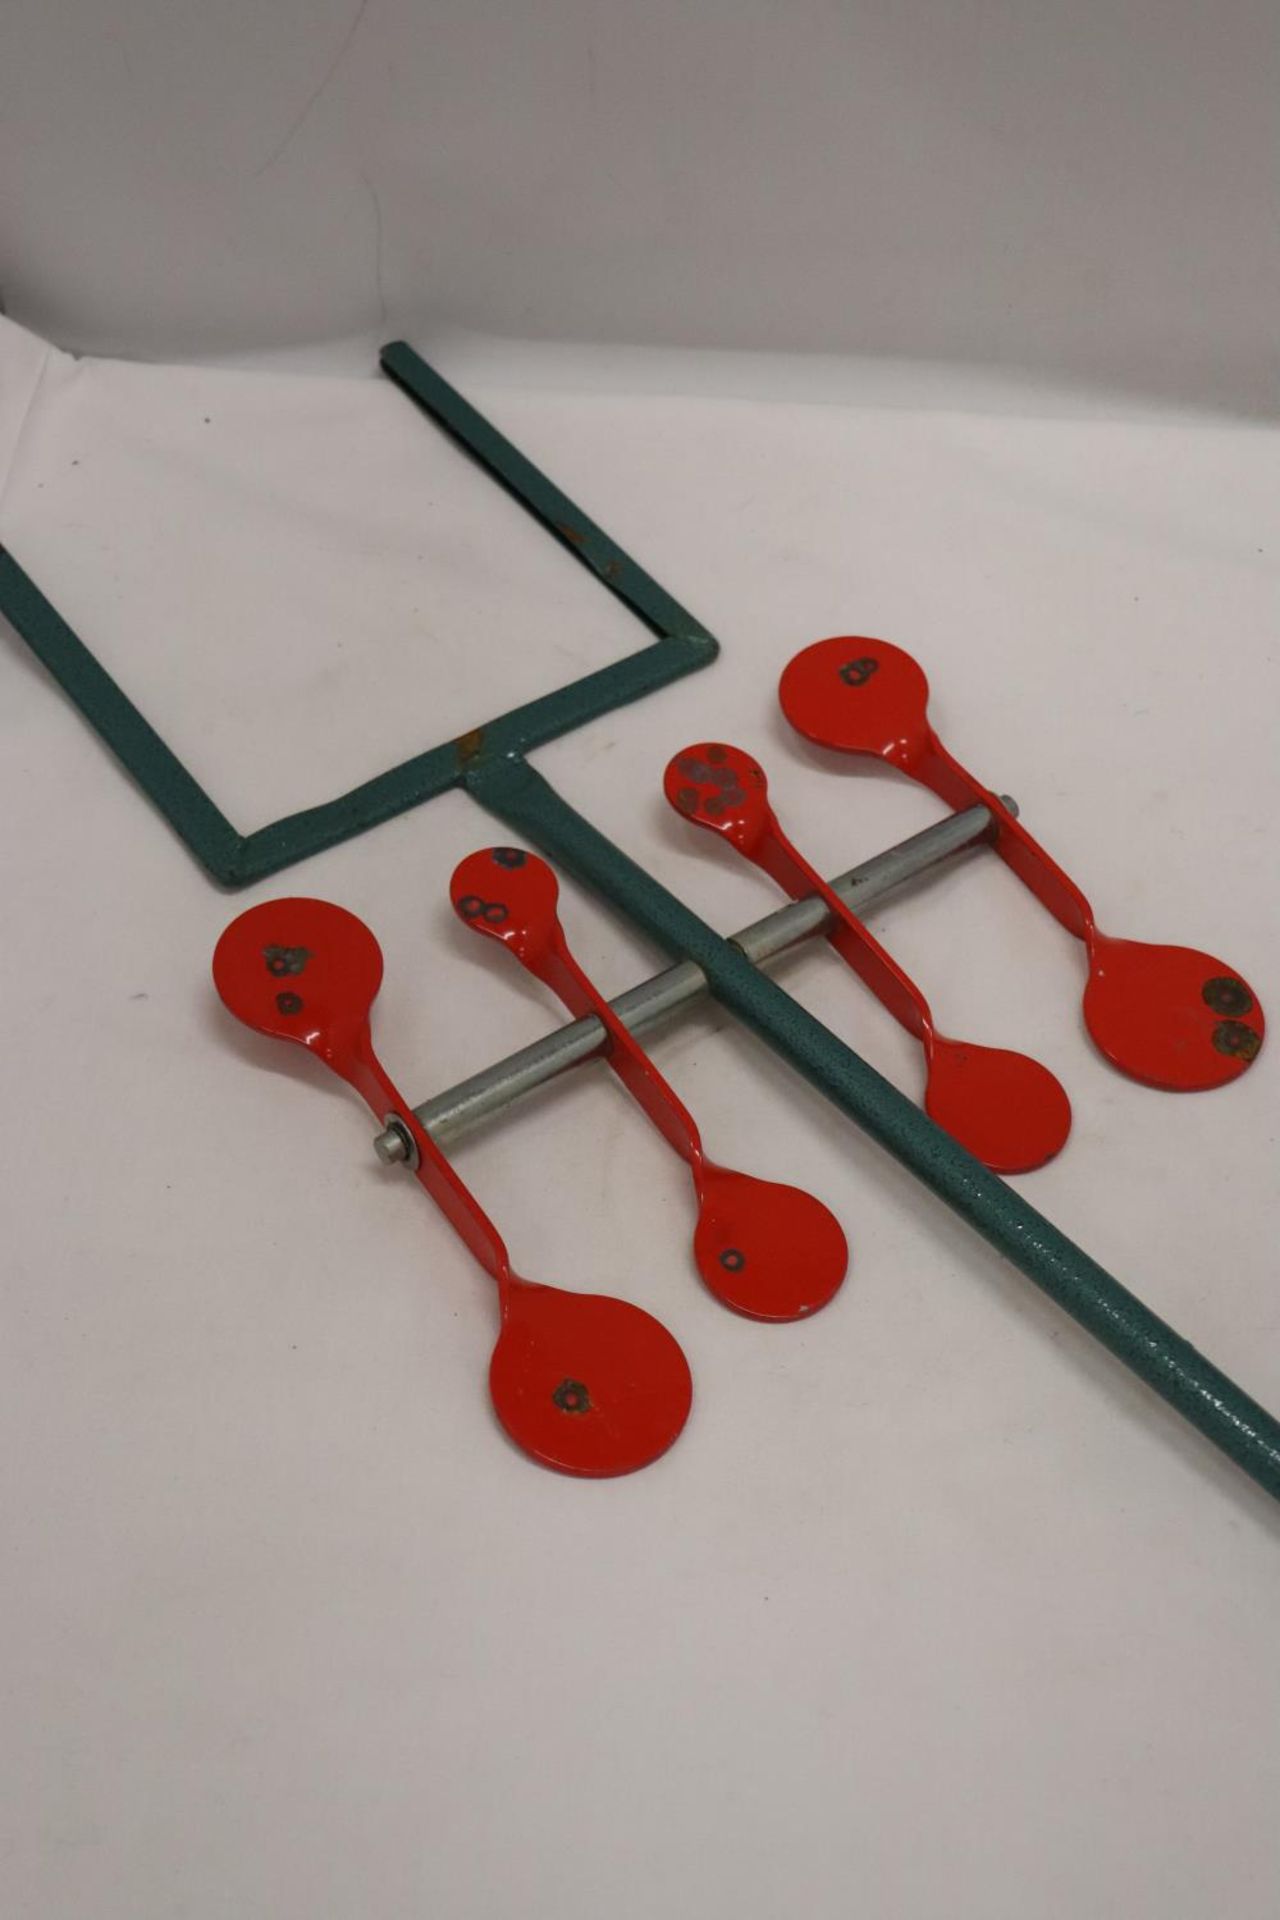 A METAL SPINNING TARGET FOR RIFLE PRACTICE - Image 2 of 6